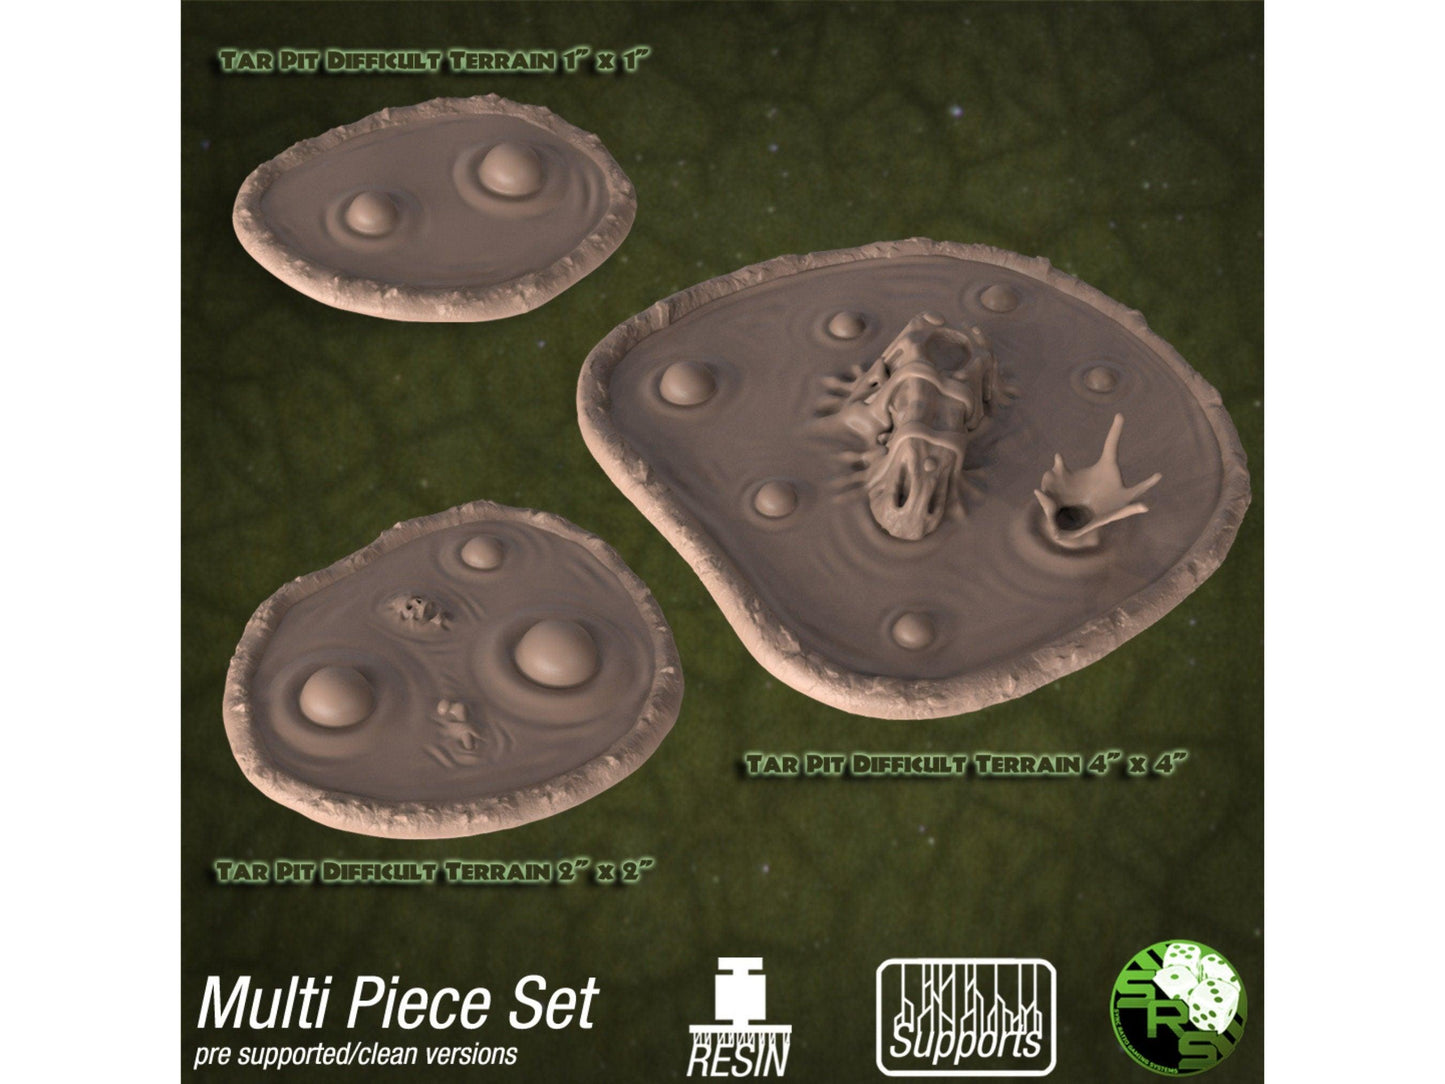 Tar pit difficult dnd wargaming terrain - 32mm scale Tabletop gaming DnD Miniature Dungeons and Dragons,dnd monster manual - Plague Miniatures shop for DnD Miniatures